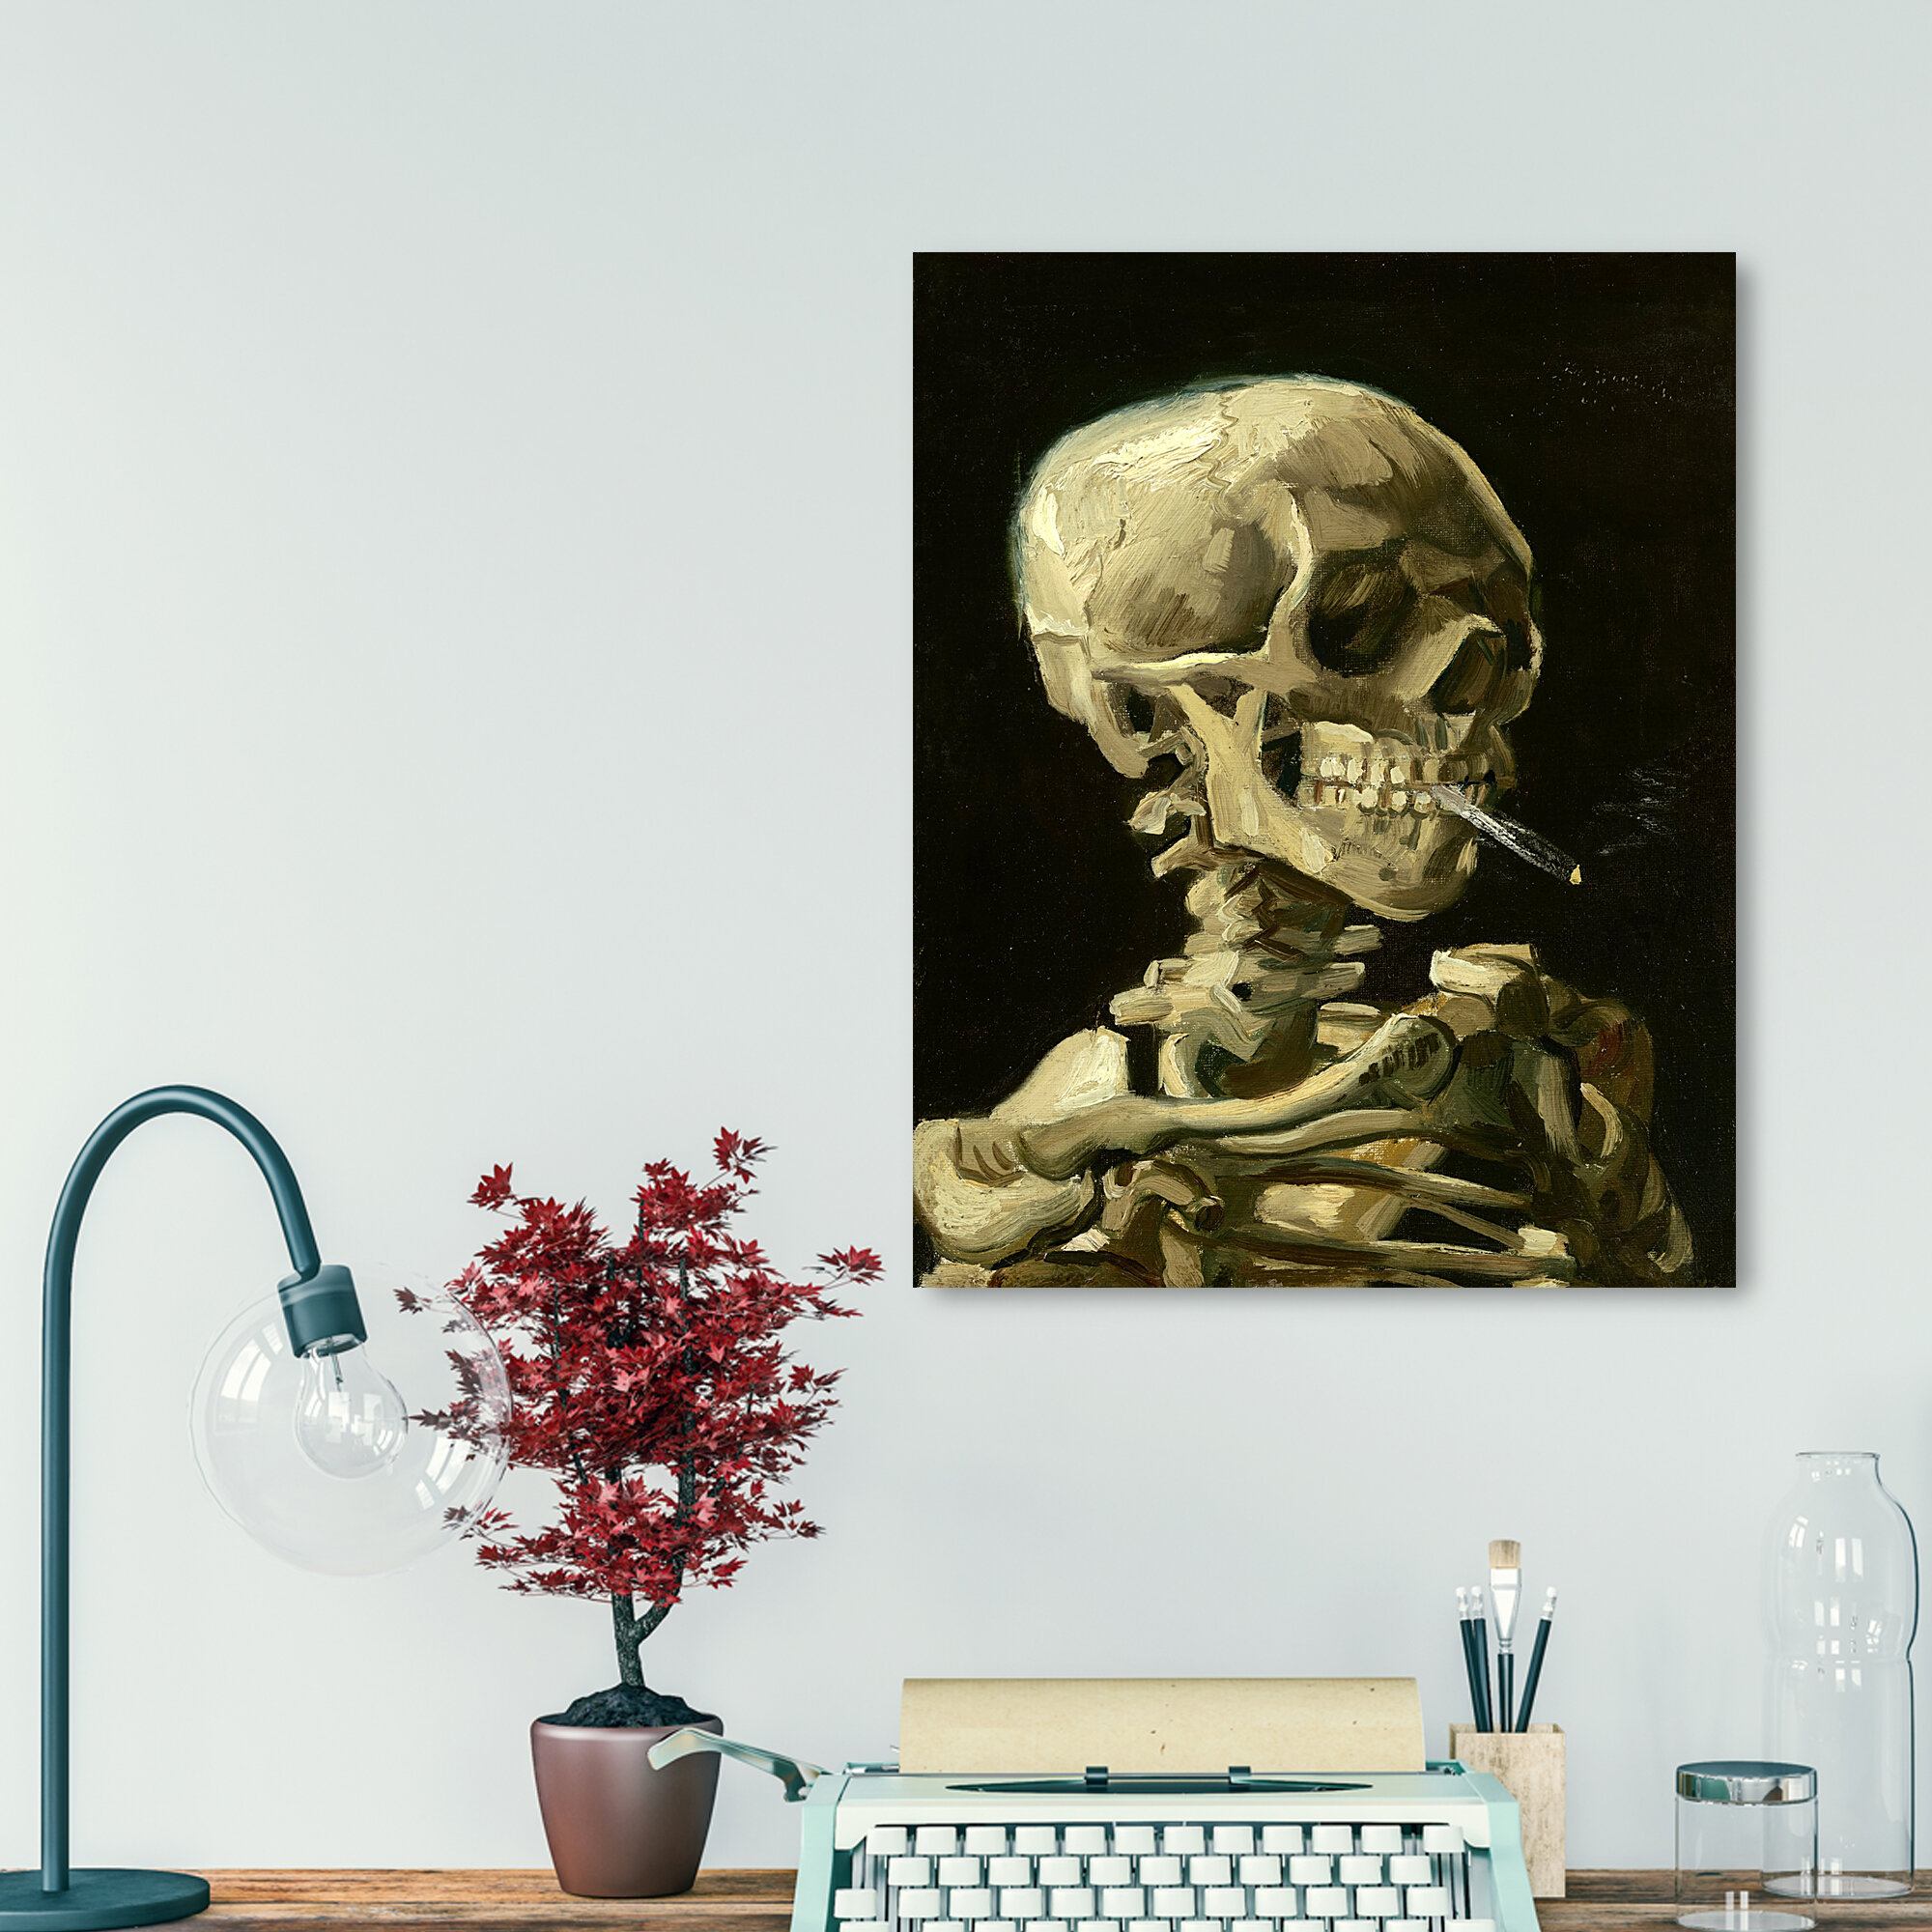 16 x 20 Skull by Vincent Van Gogh Oil Painting Reproduction on Canvas Prints